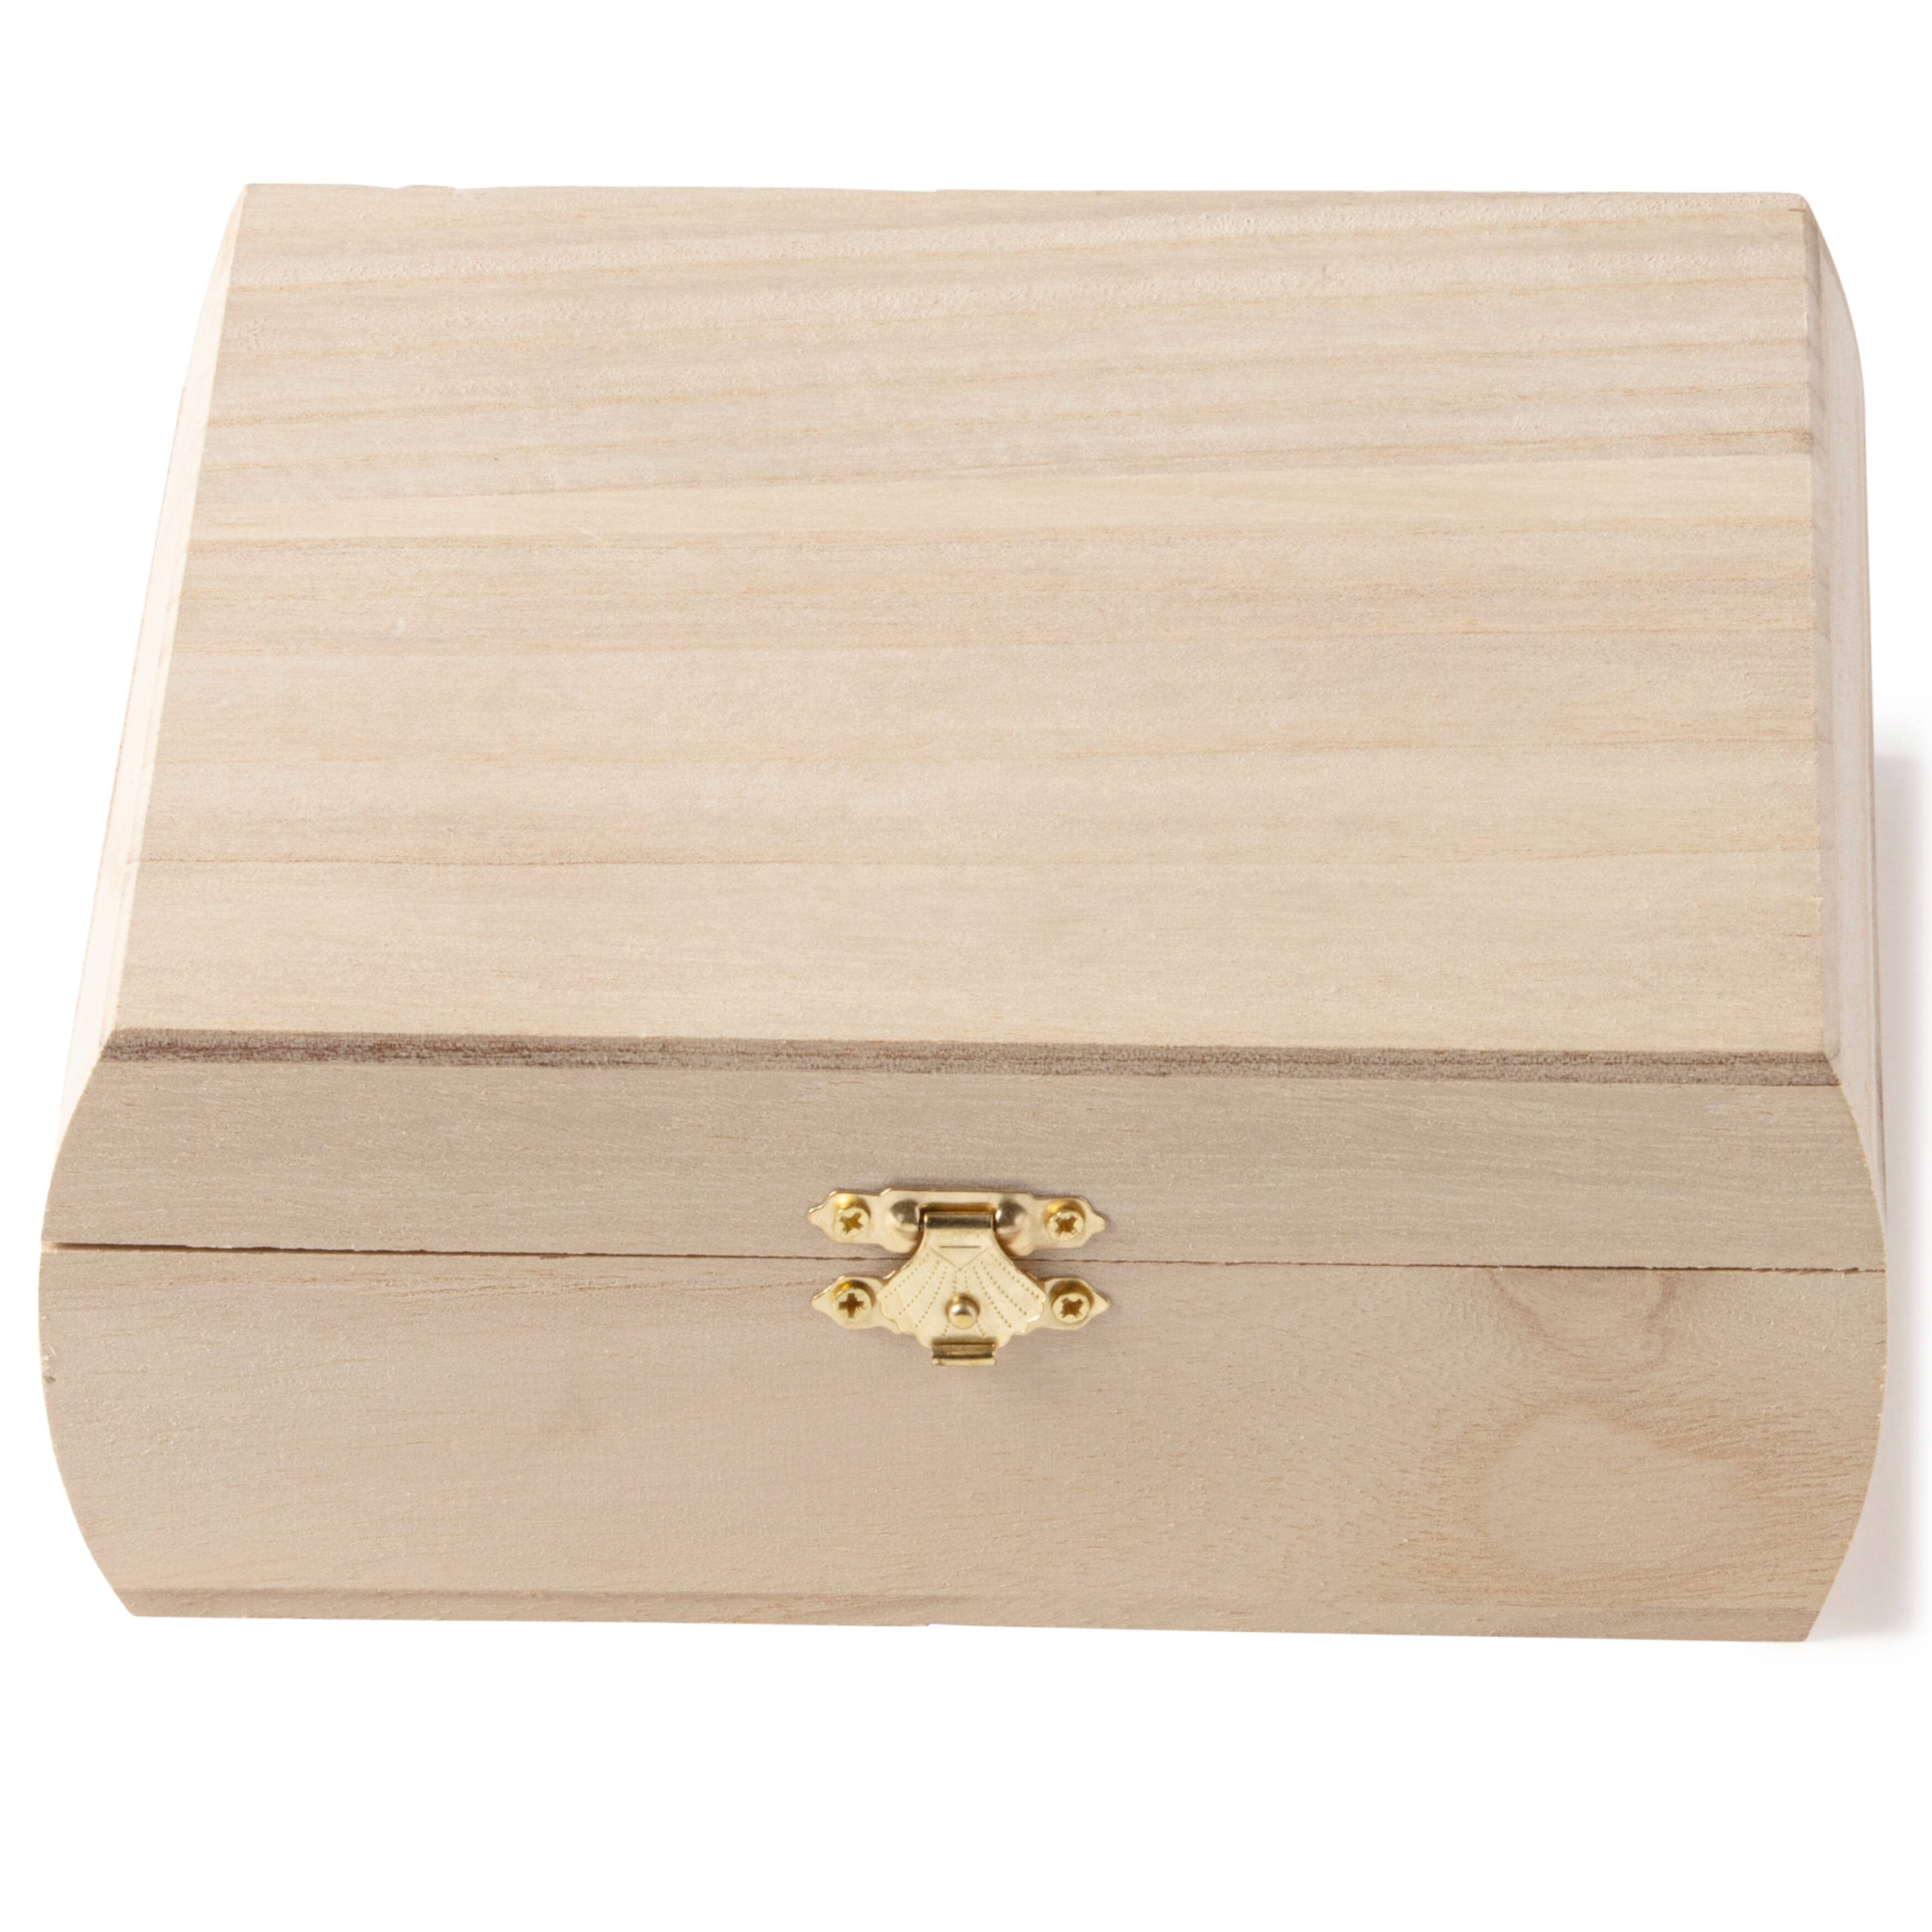 Wooden Box with Hinged Lid 7x7 Inches, for Gifts, Crafts, Jewelry | Woodpeckers | Michaels